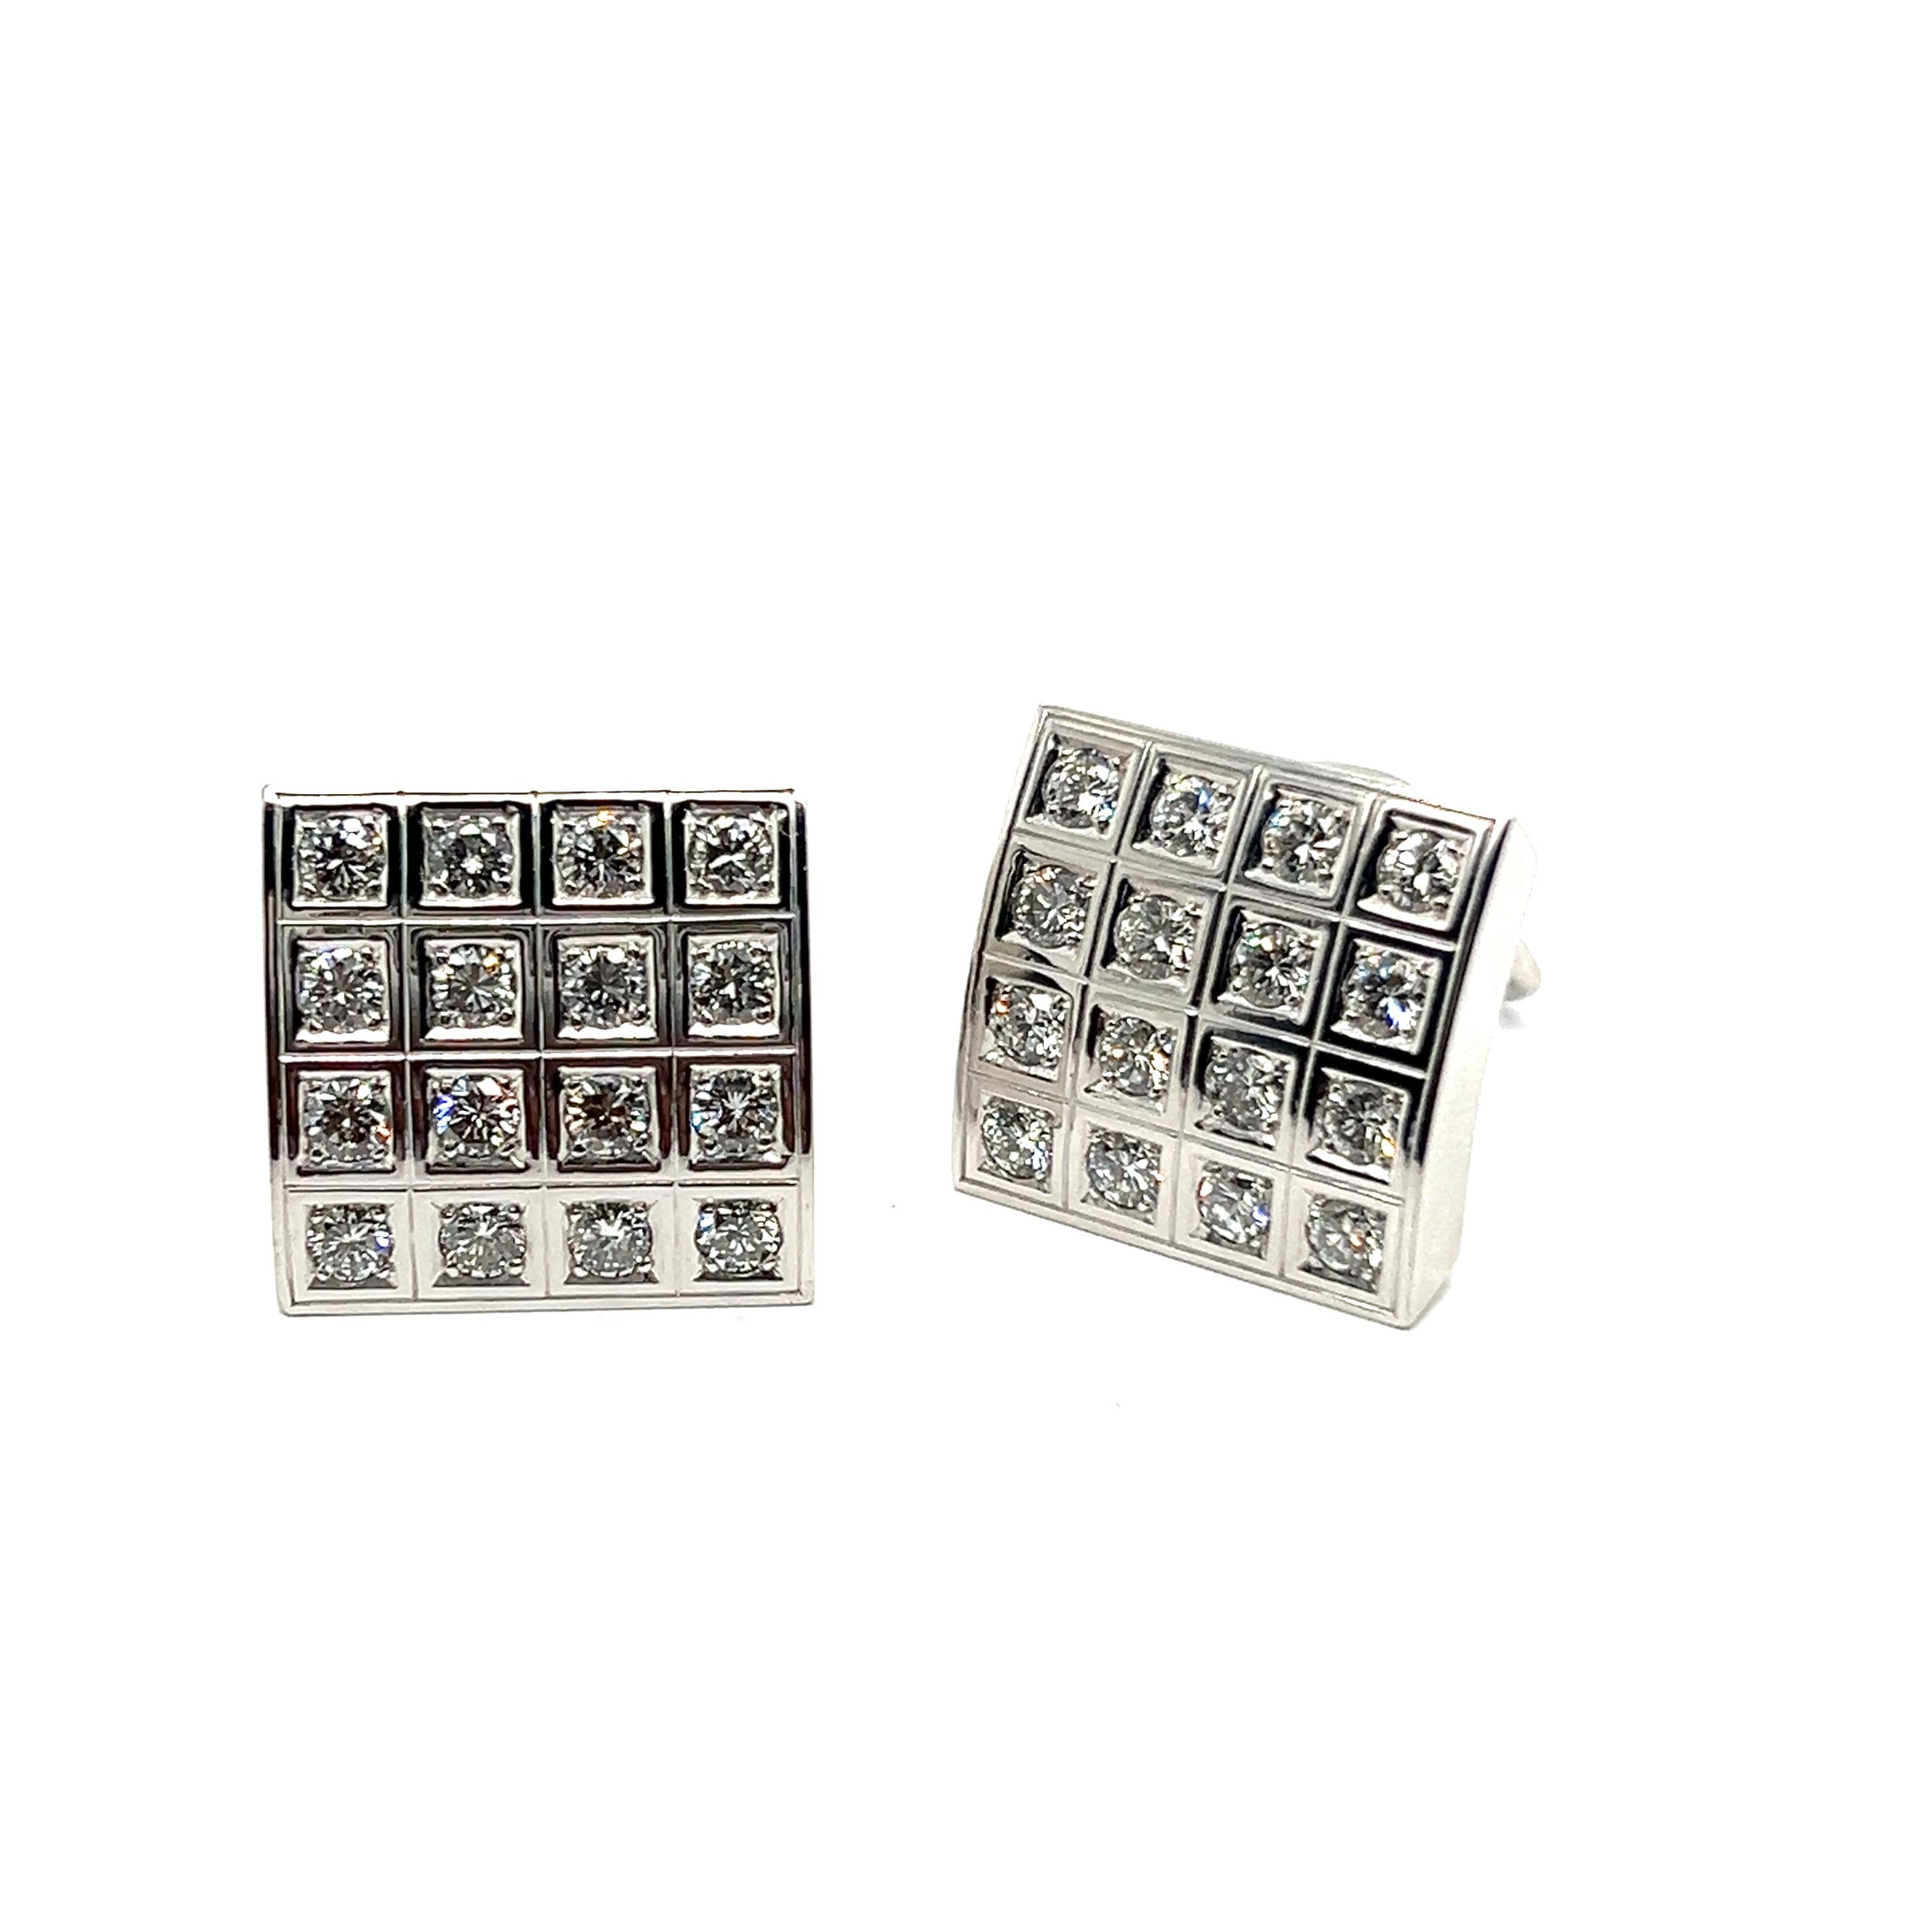 Brilliant Cut  Bold Graphic Earrings with Diamonds in 18 Karat White Gold by Majo Fruithof For Sale